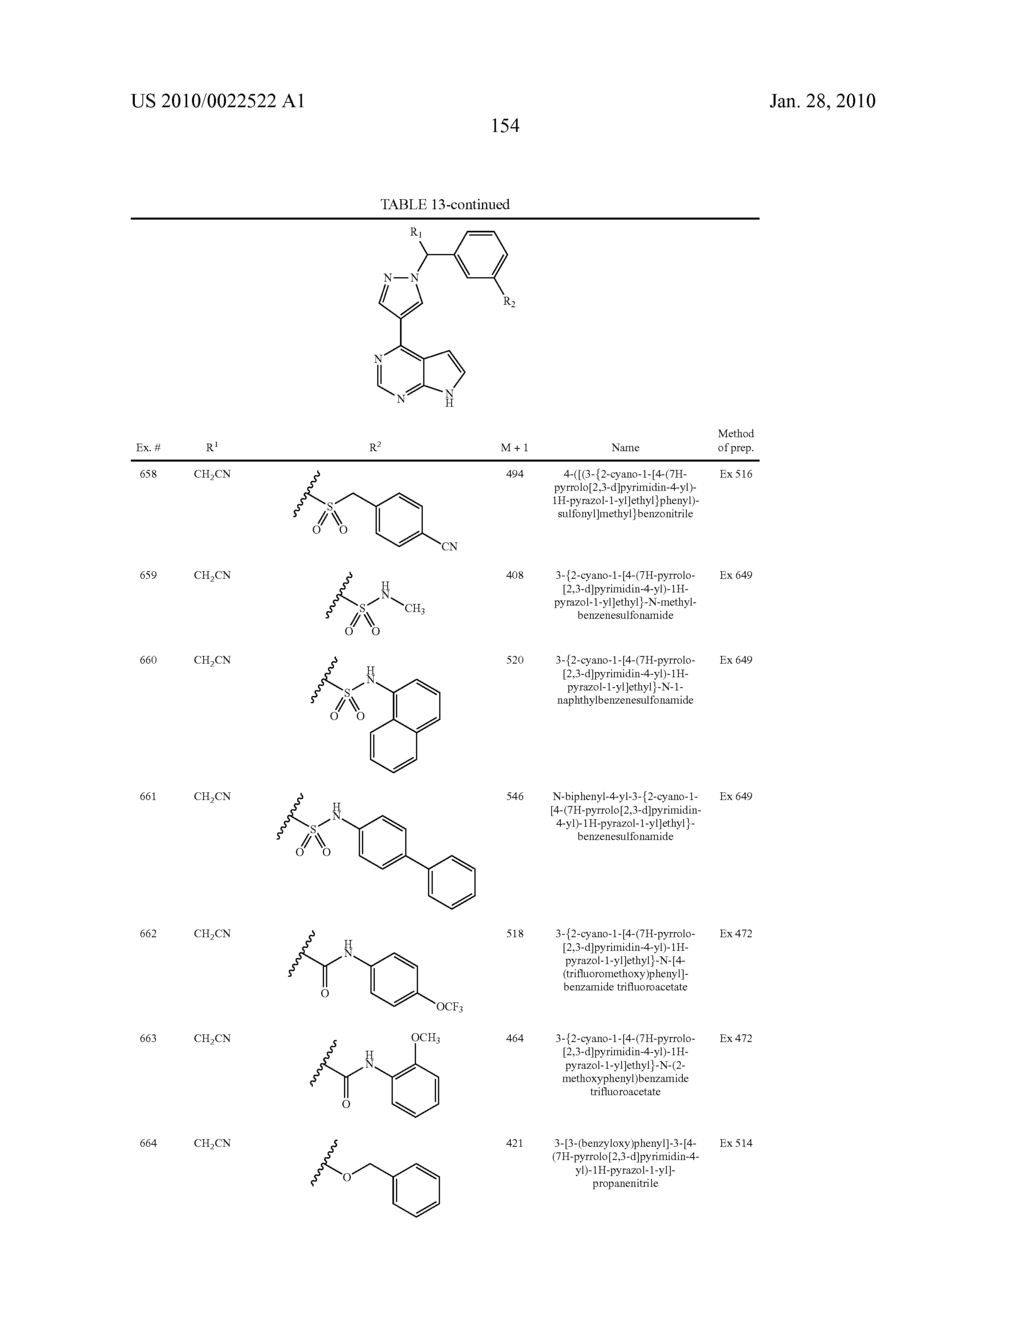 HETEROARYL SUBSTITUTED PYRROLO[2,3-b]PYRIDINES AND PYRROLO[2,3-b]PYRIMIDINES AS JANUS KINASE INHIBITORS - diagram, schematic, and image 155